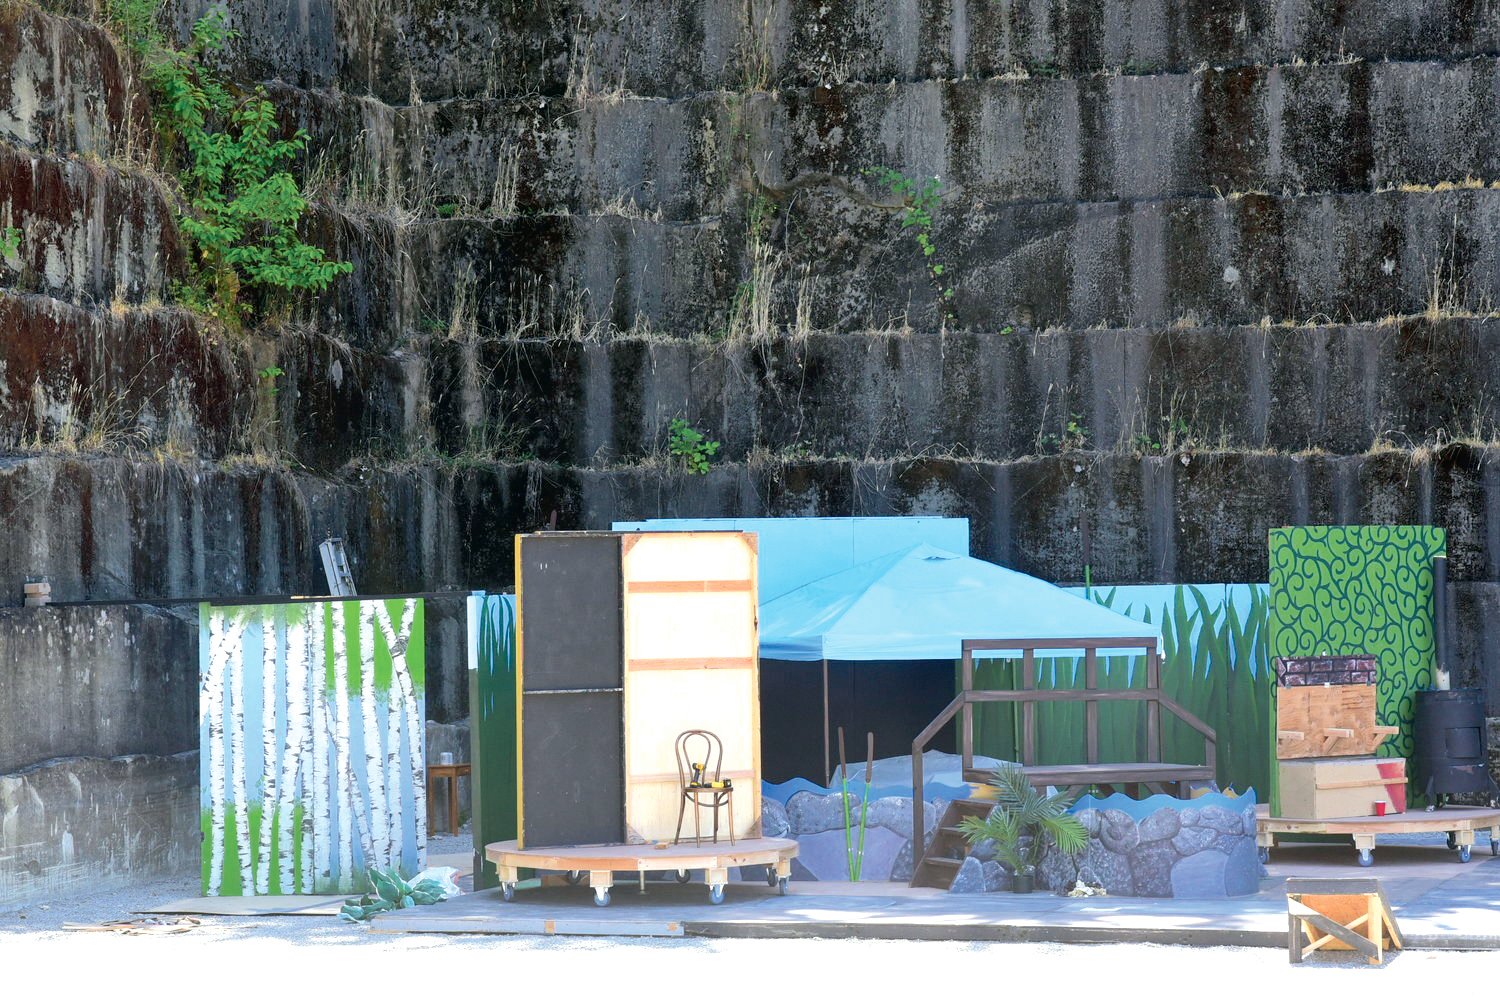 The set for the Tenino Young-at-Heart Theatre's performance of "A Year With Frog and Toad" sits inside the Tenino Quarry Pool.